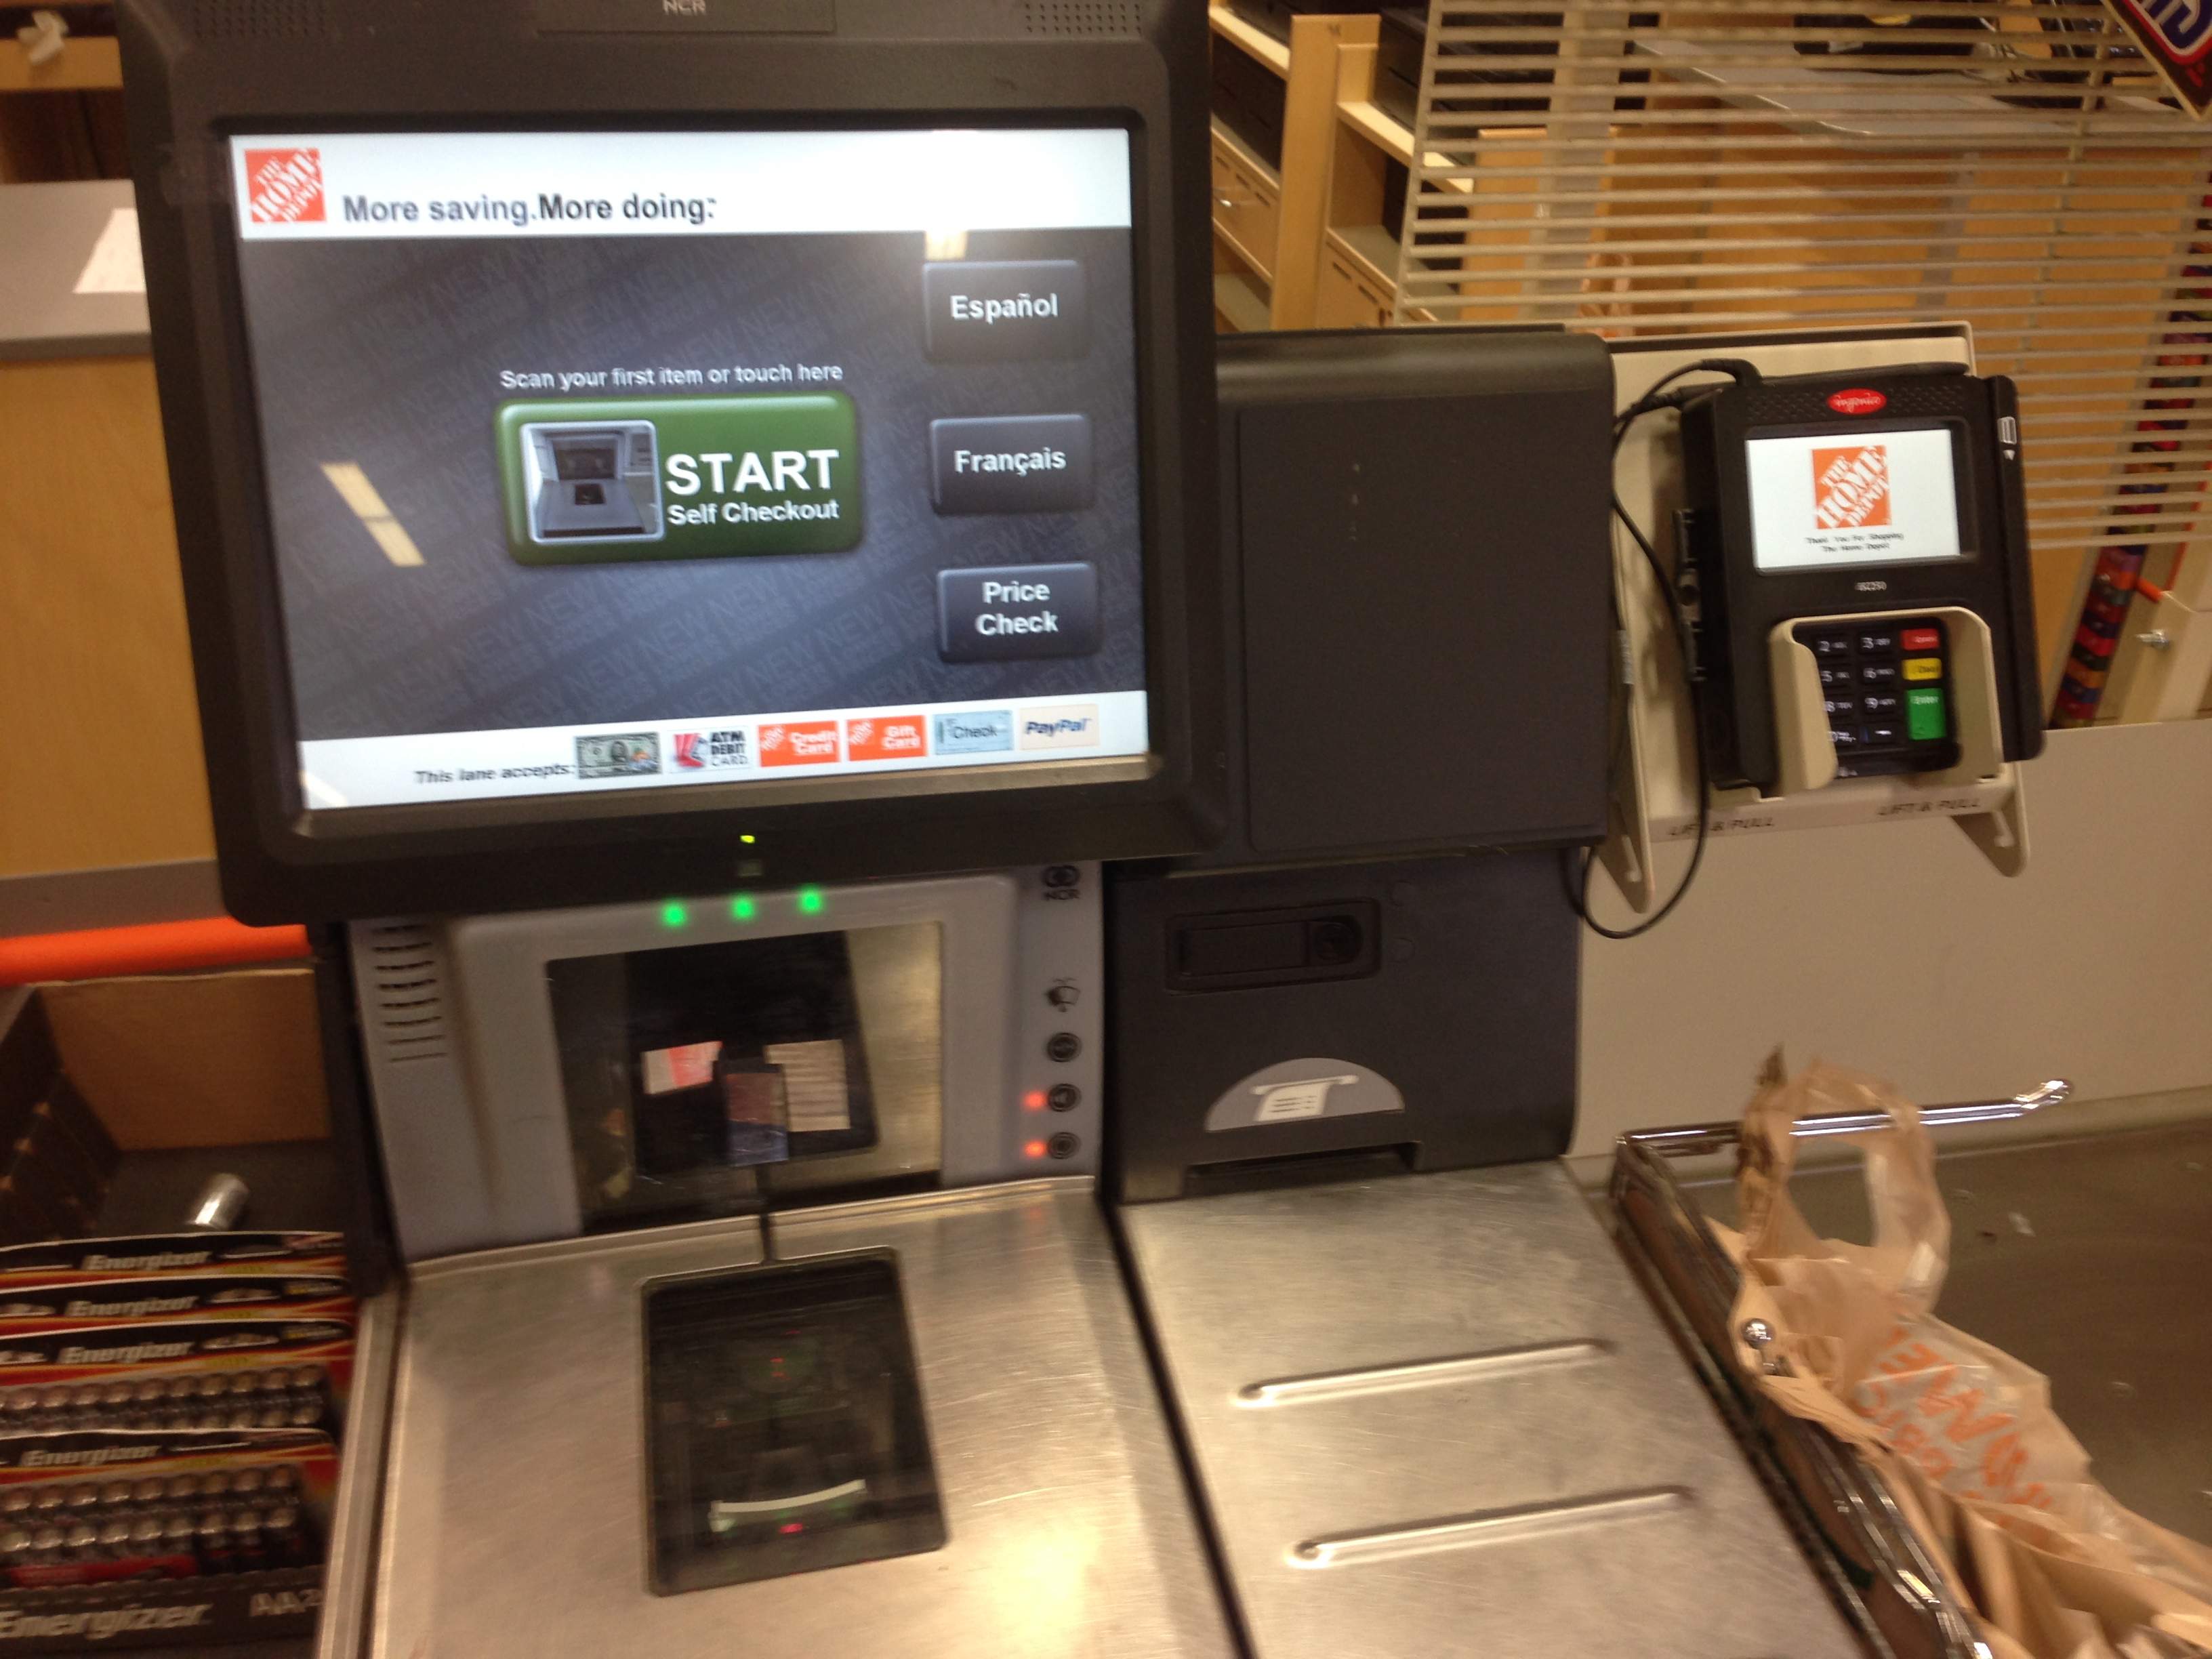 In Home Depot Breach, Investigation Focuses on SelfCheckout Lanes 